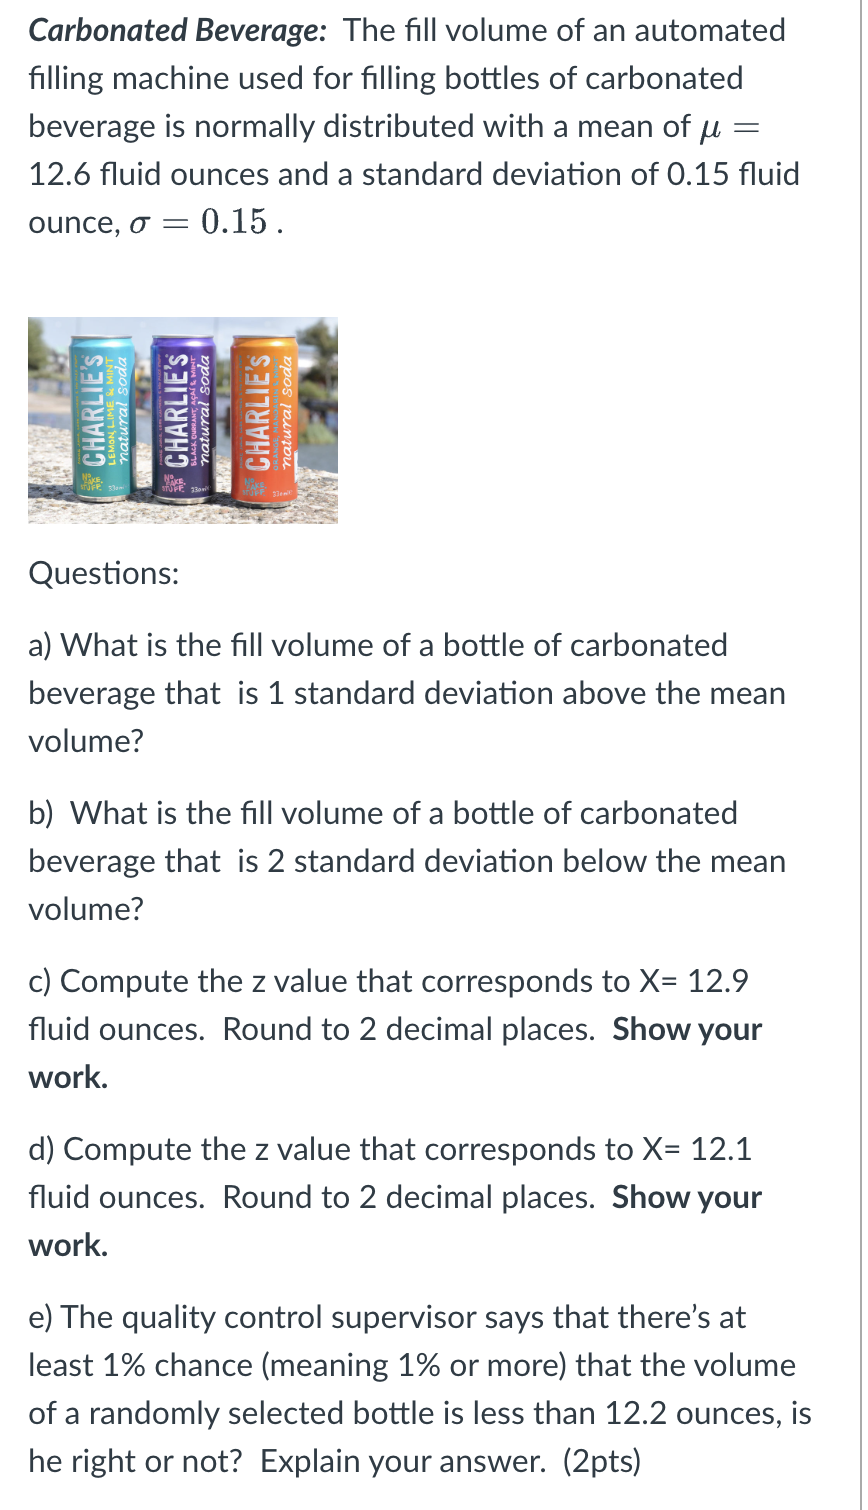 Carbonated Beverage: The fill volume of an automated
filling machine used for filling bottles of carbonated
beverage is normally distributed with a mean of μ =
12.6 fluid ounces and a standard deviation of 0.15 fluid
ounce, o = 0.15.
CHARLIE'S
natural soda
CHARLIE'S
natural soda
CHARLIE'S
atural soda
Questions:
a) What is the fill volume of a bottle of carbonated
beverage that is 1 standard deviation above the mean
volume?
b) What is the fill volume of a bottle of carbonated
beverage that is 2 standard deviation below the mean
volume?
c) Compute the z value that corresponds to X= 12.9
fluid ounces. Round to 2 decimal places. Show your
work.
d) Compute the z value that corresponds to X= 12.1
fluid ounces. Round to 2 decimal places. Show your
work.
e) The quality control supervisor says that there's at
least 1% chance (meaning 1% or more) that the volume
of a randomly selected bottle is less than 12.2 ounces, is
he right or not? Explain your answer. (2pts)